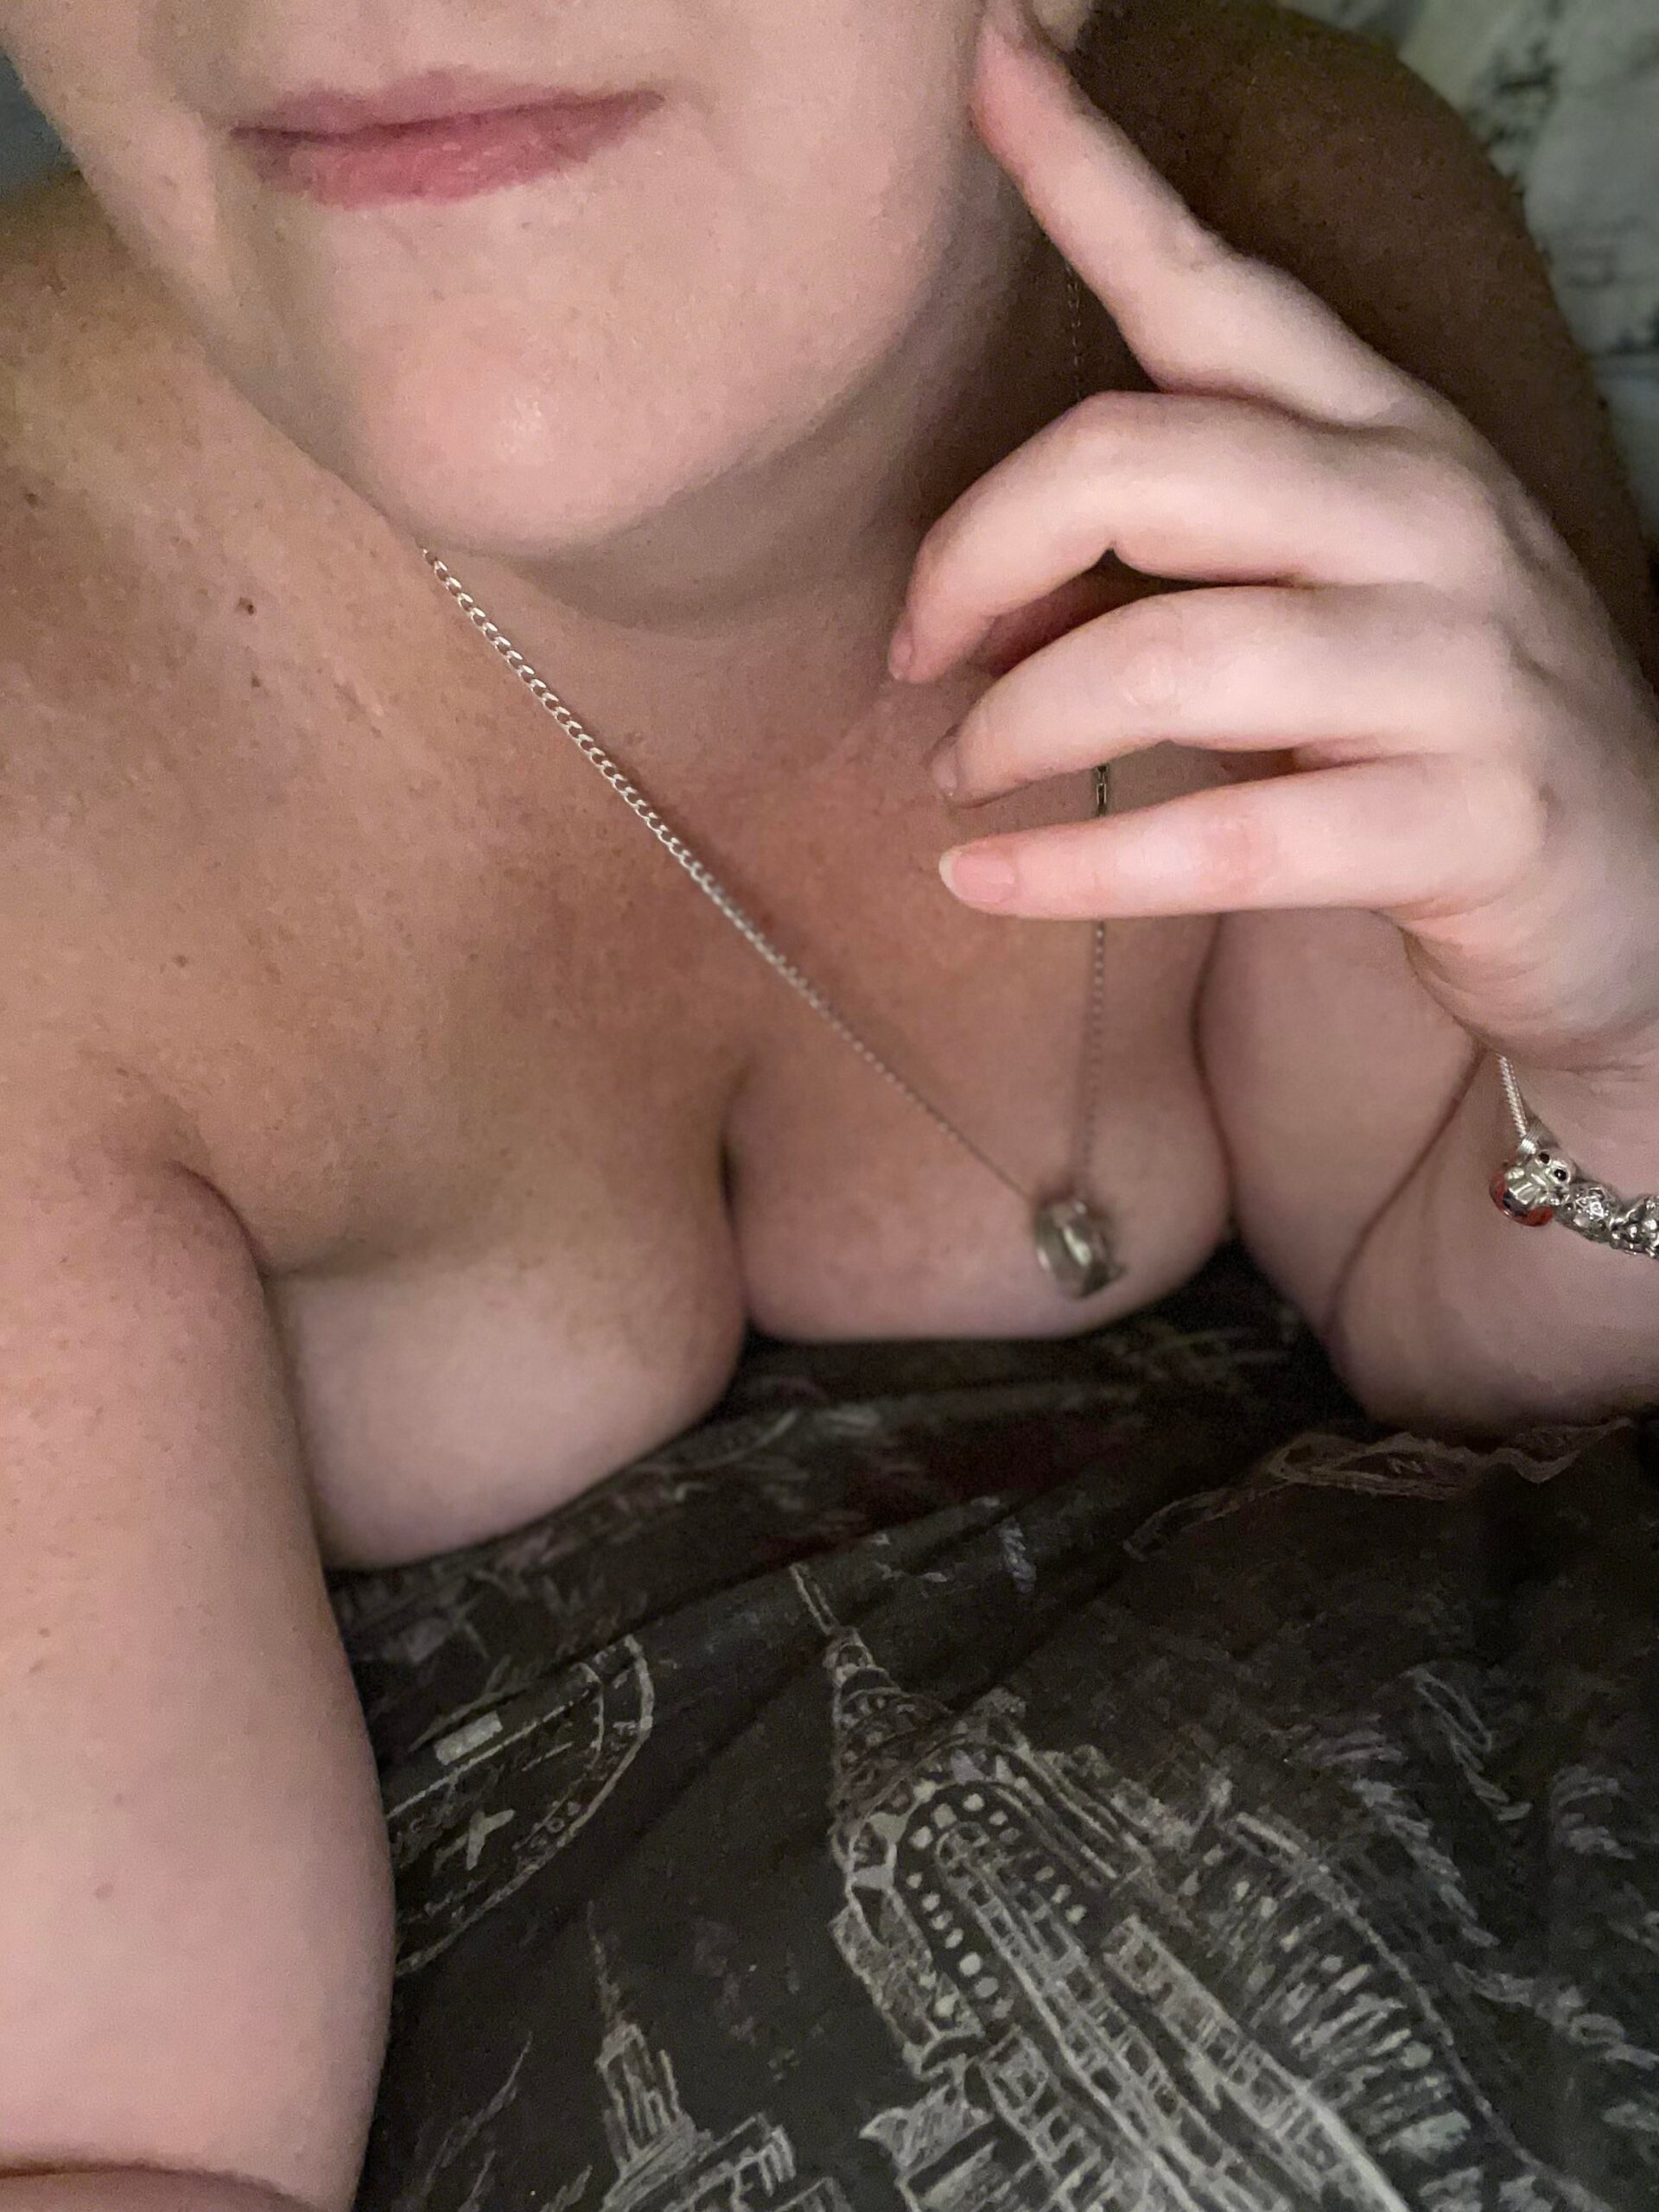 Bbwpictures -  Hope you’re all having a lovely Saturday 😘